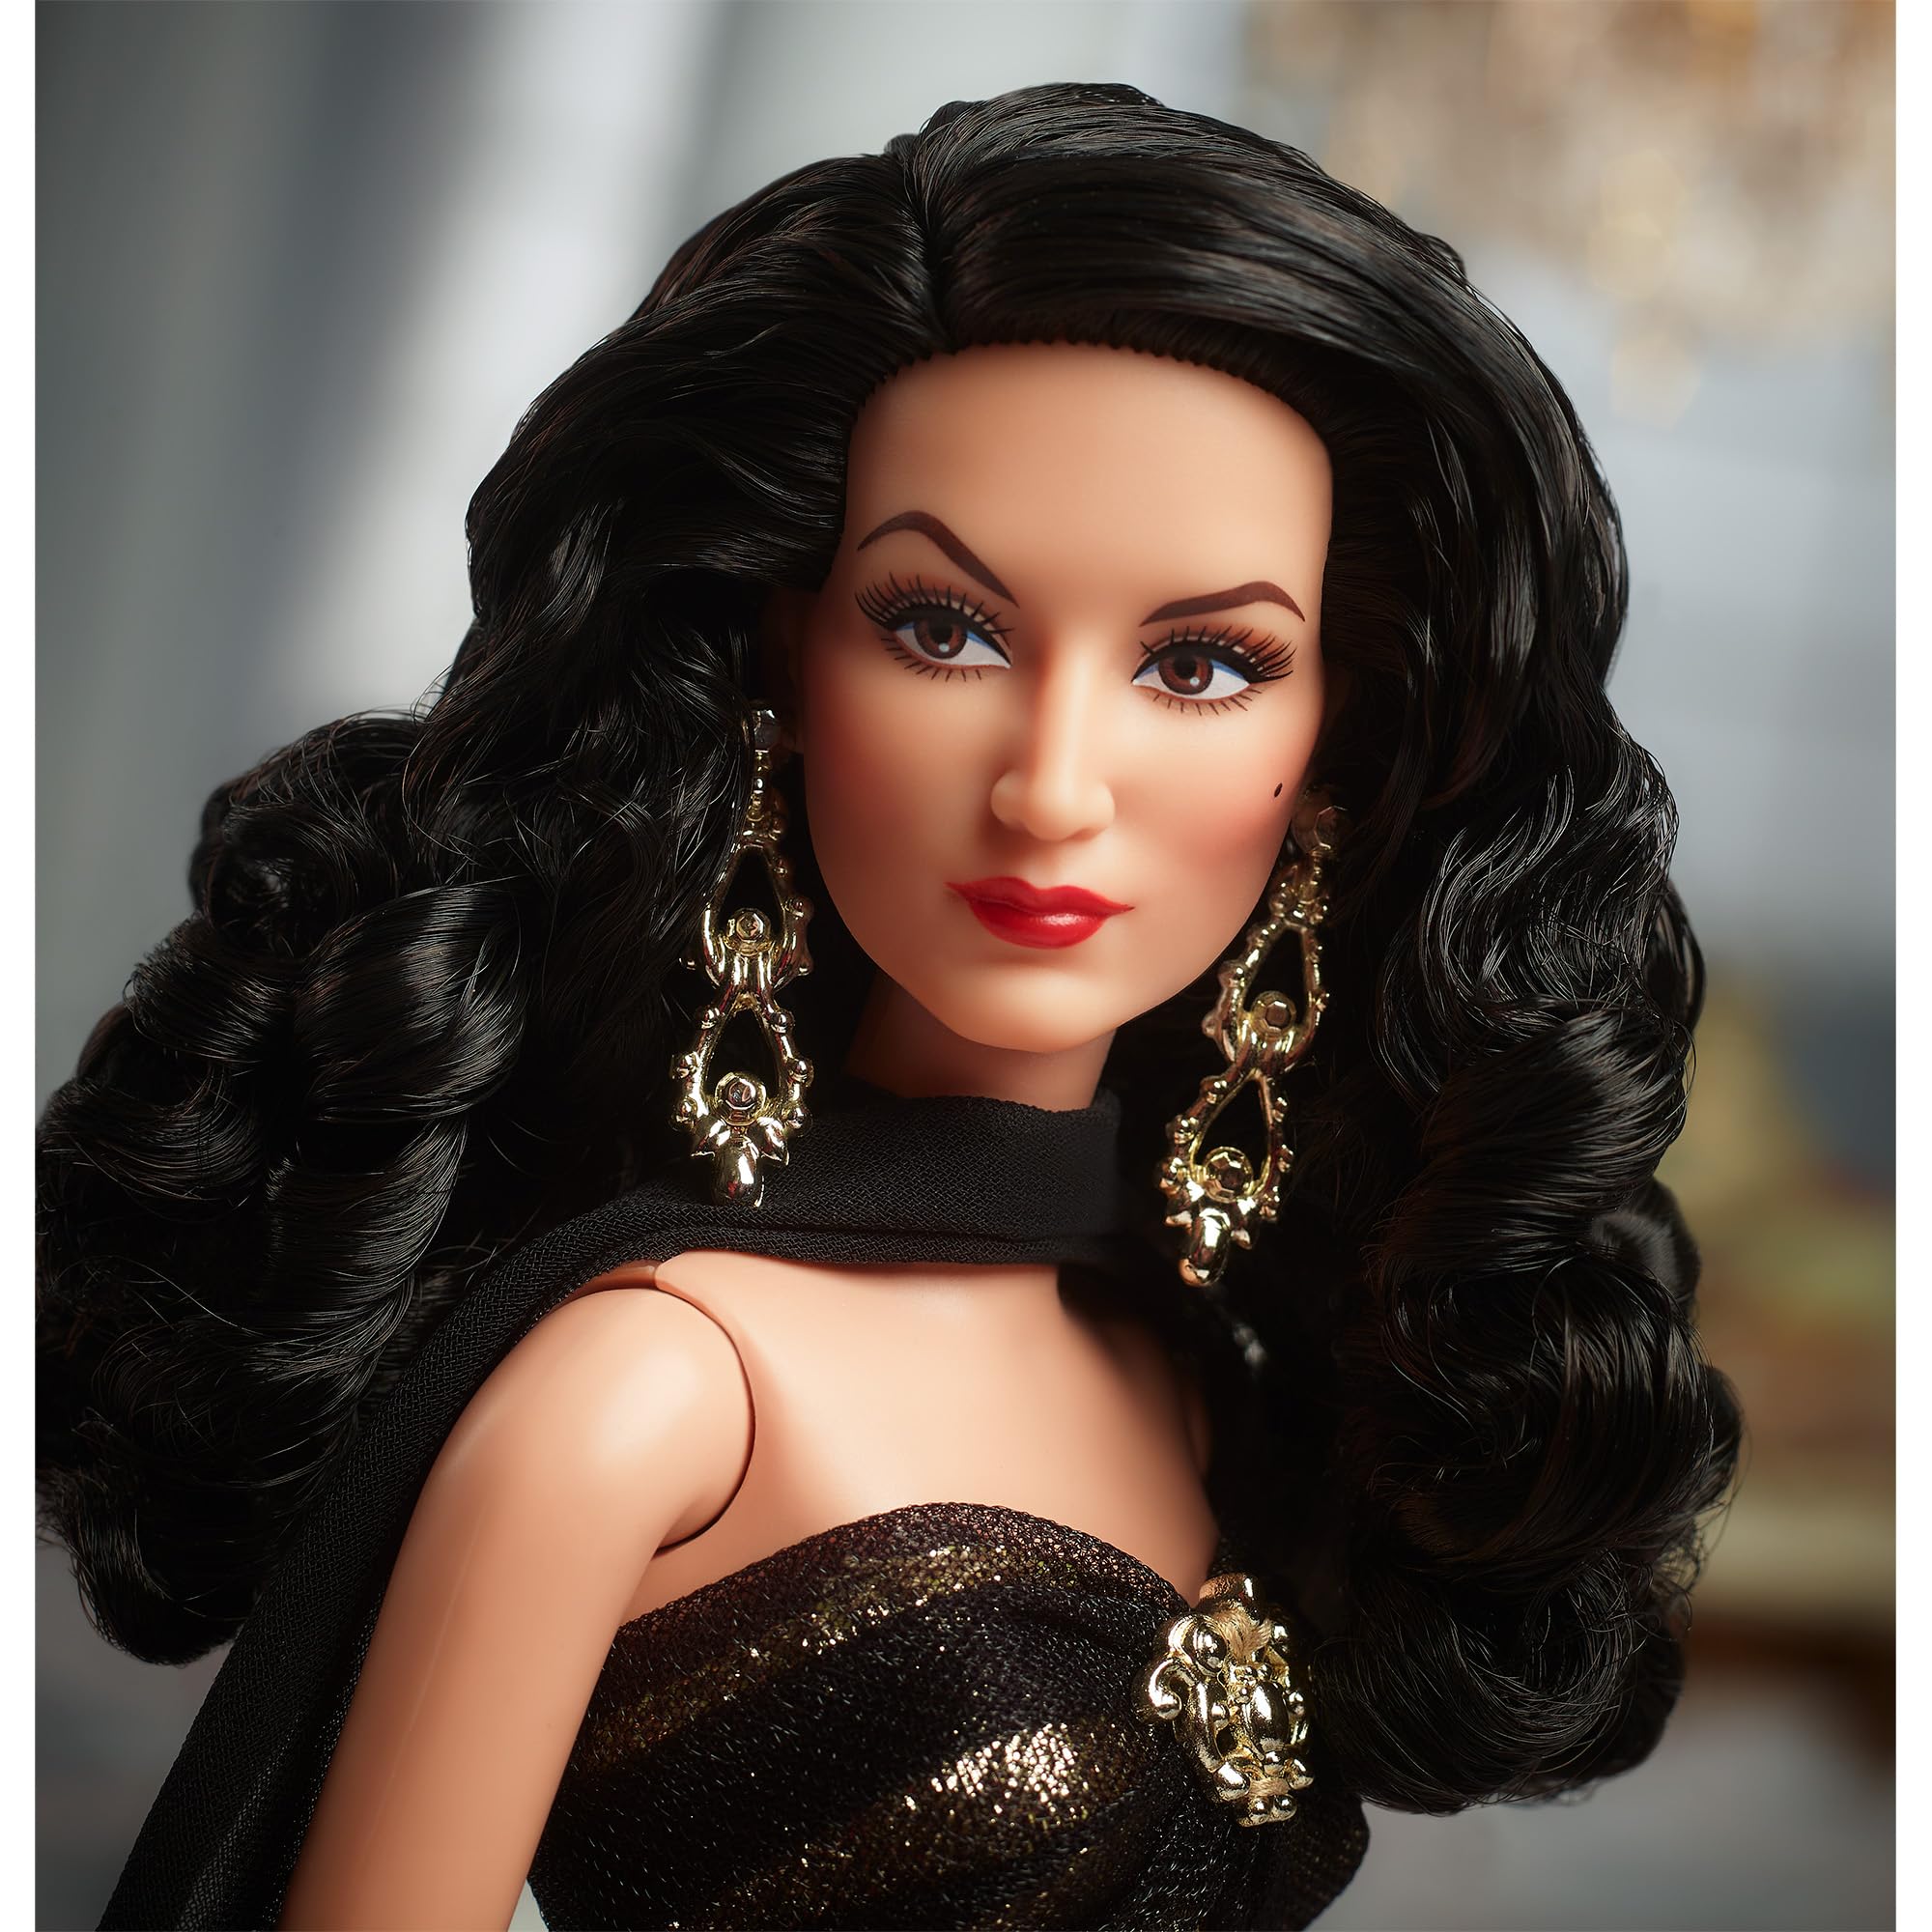 Barbie Collector Signature Doll, María Félix Wearing Elegant, Glimmering Gold and Black Gown with Ornate Jewelry, Barbie Tribute Collection